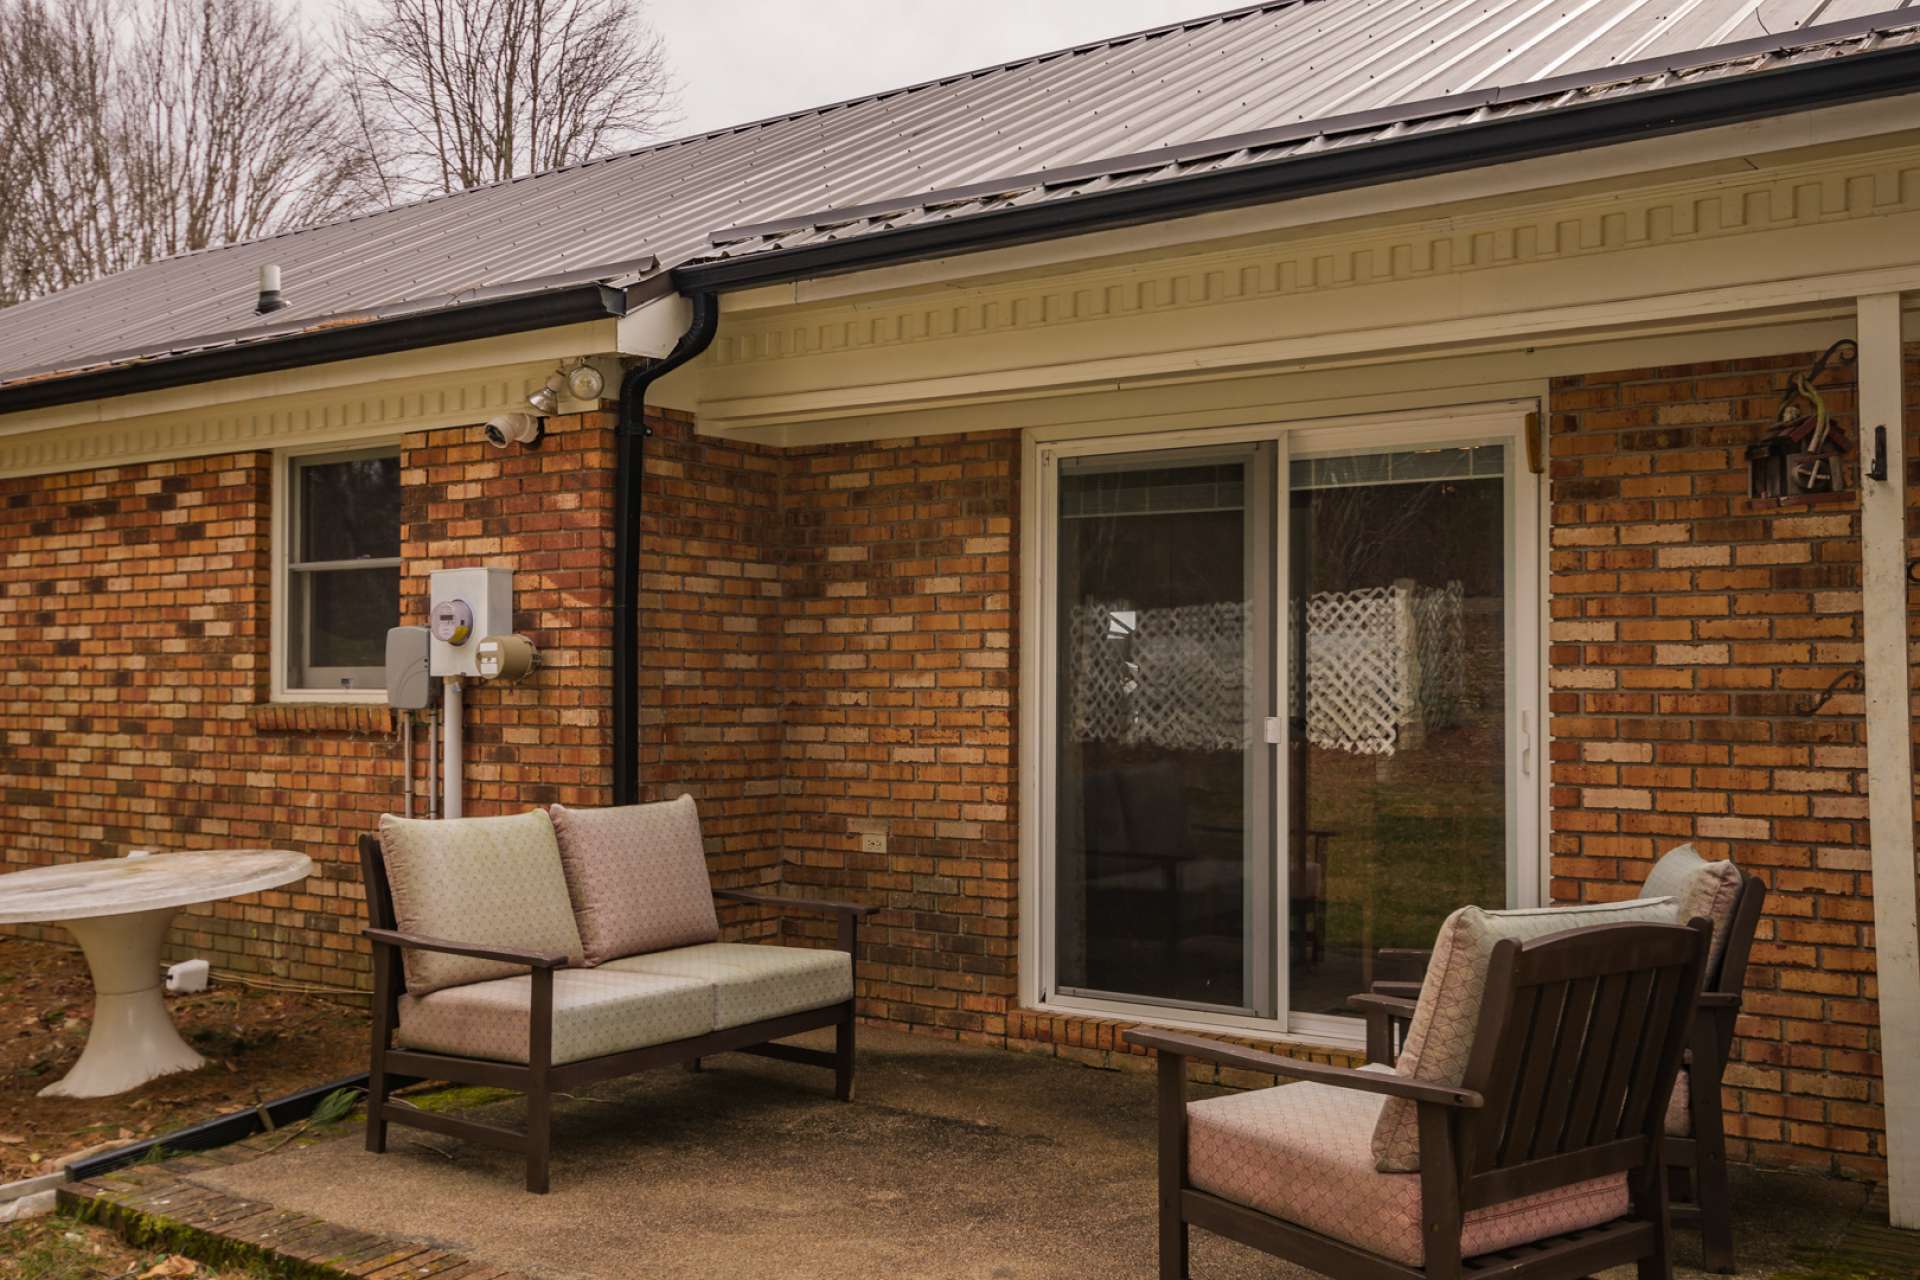 You will enjoy grilling and dining on this back patio.